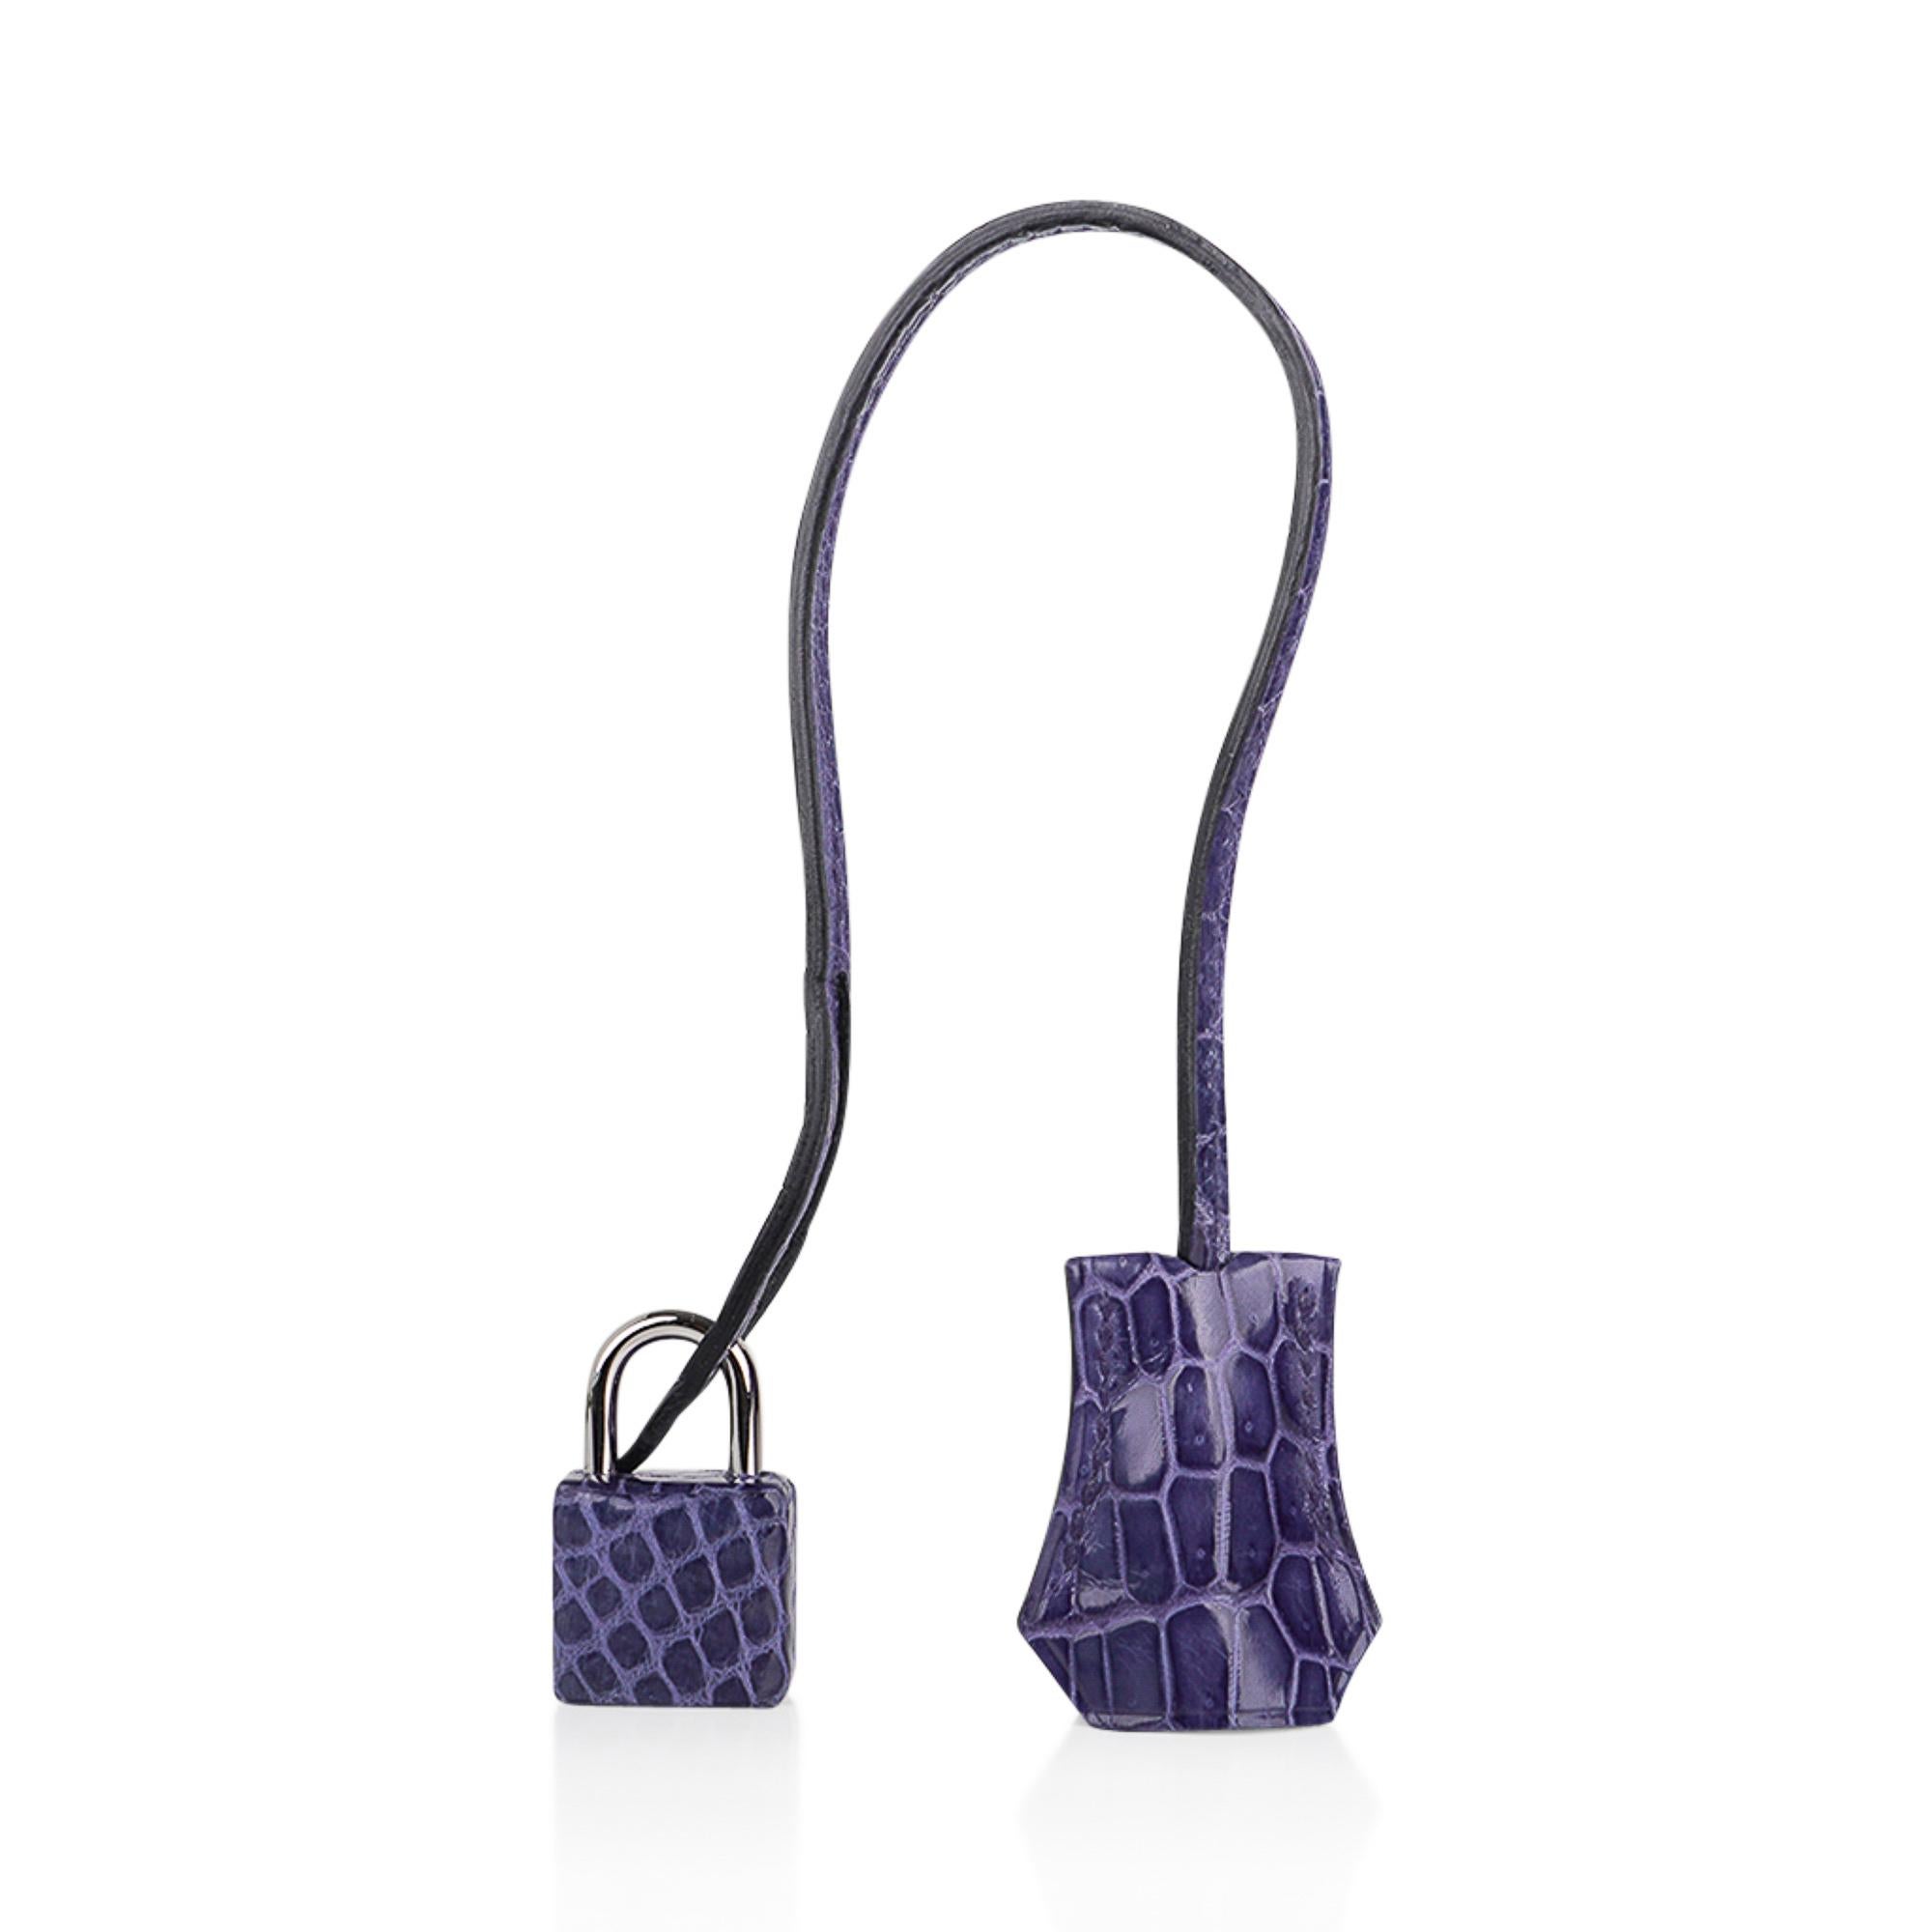 Mightychic offers a guaranteed authentic Hermes Birkin 35 bag featured in limited edition Blue Brighton Porosus Crocodile.
This Hermes crocodile Birkin bag blue has a lavender undertone and changes in different light.  Utterly extraordinary, this